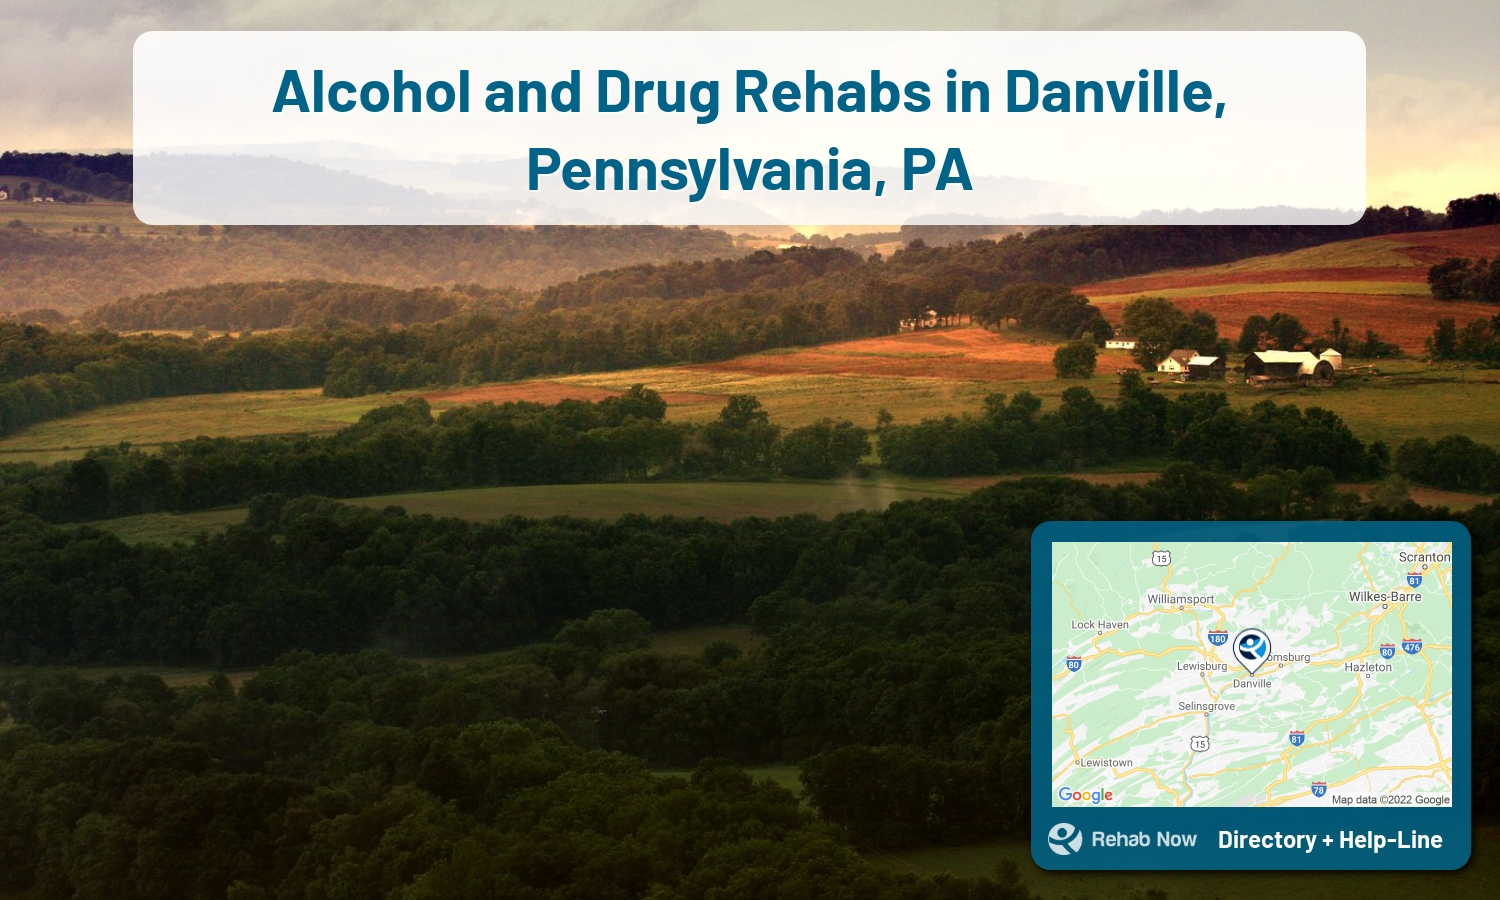 Let our expert counselors help find the best addiction treatment in Danville, Pennsylvania now with a free call to our hotline.